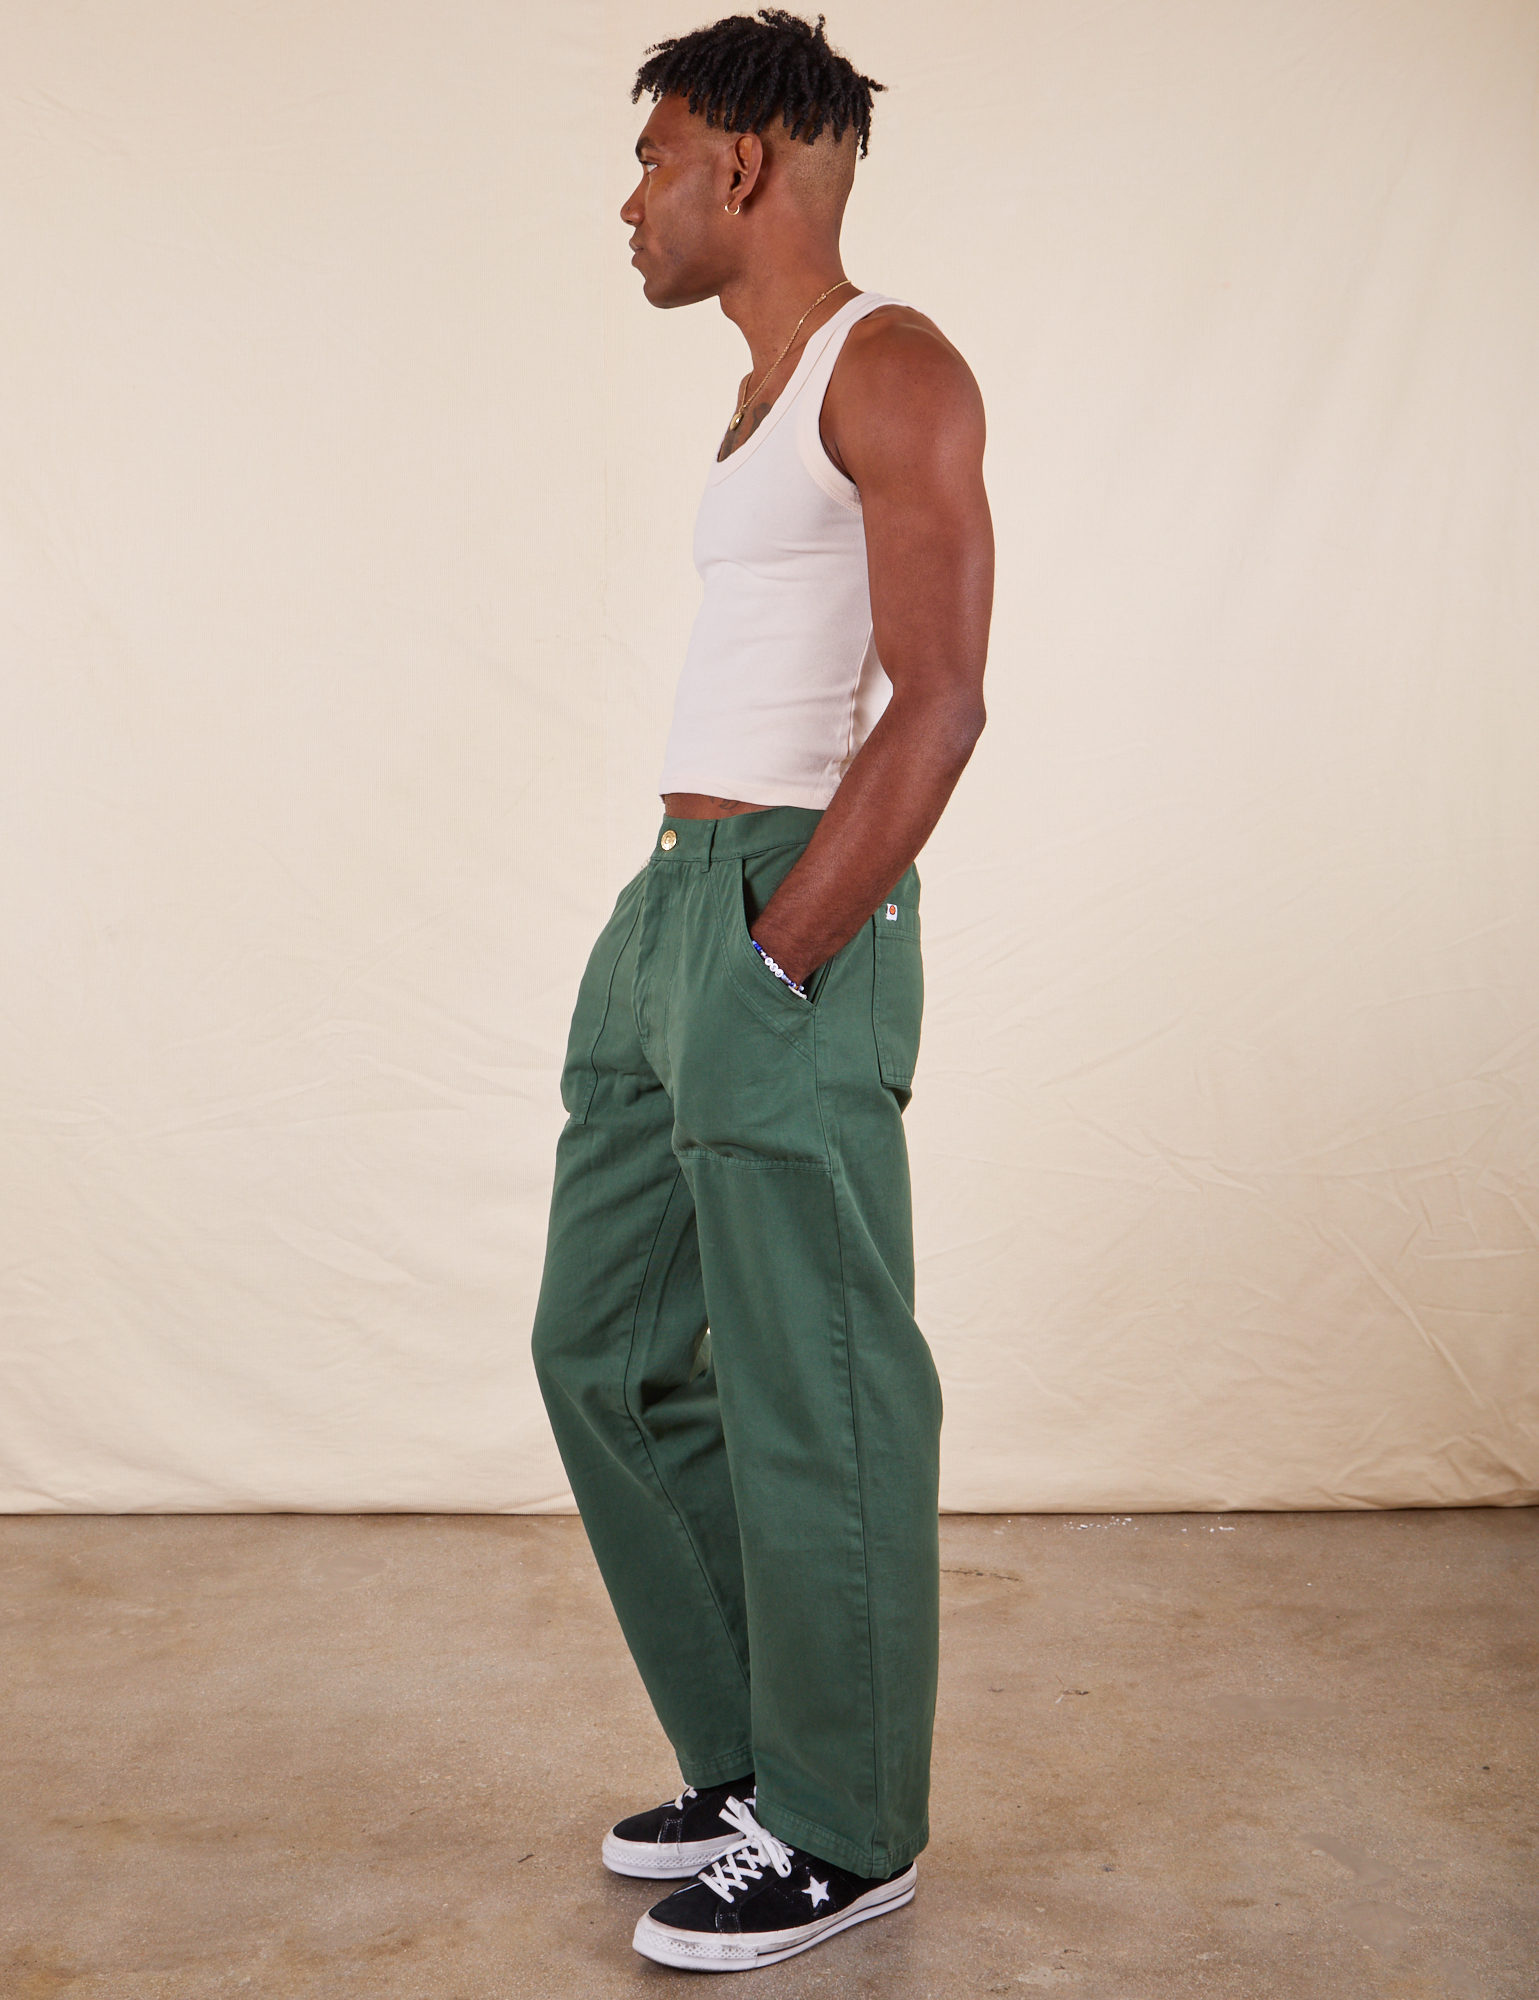 Jerrod is 6&#39;3&quot; and wearing Long S Work Pants in Dark Emerald Green paired with vintage off-white Tank Top